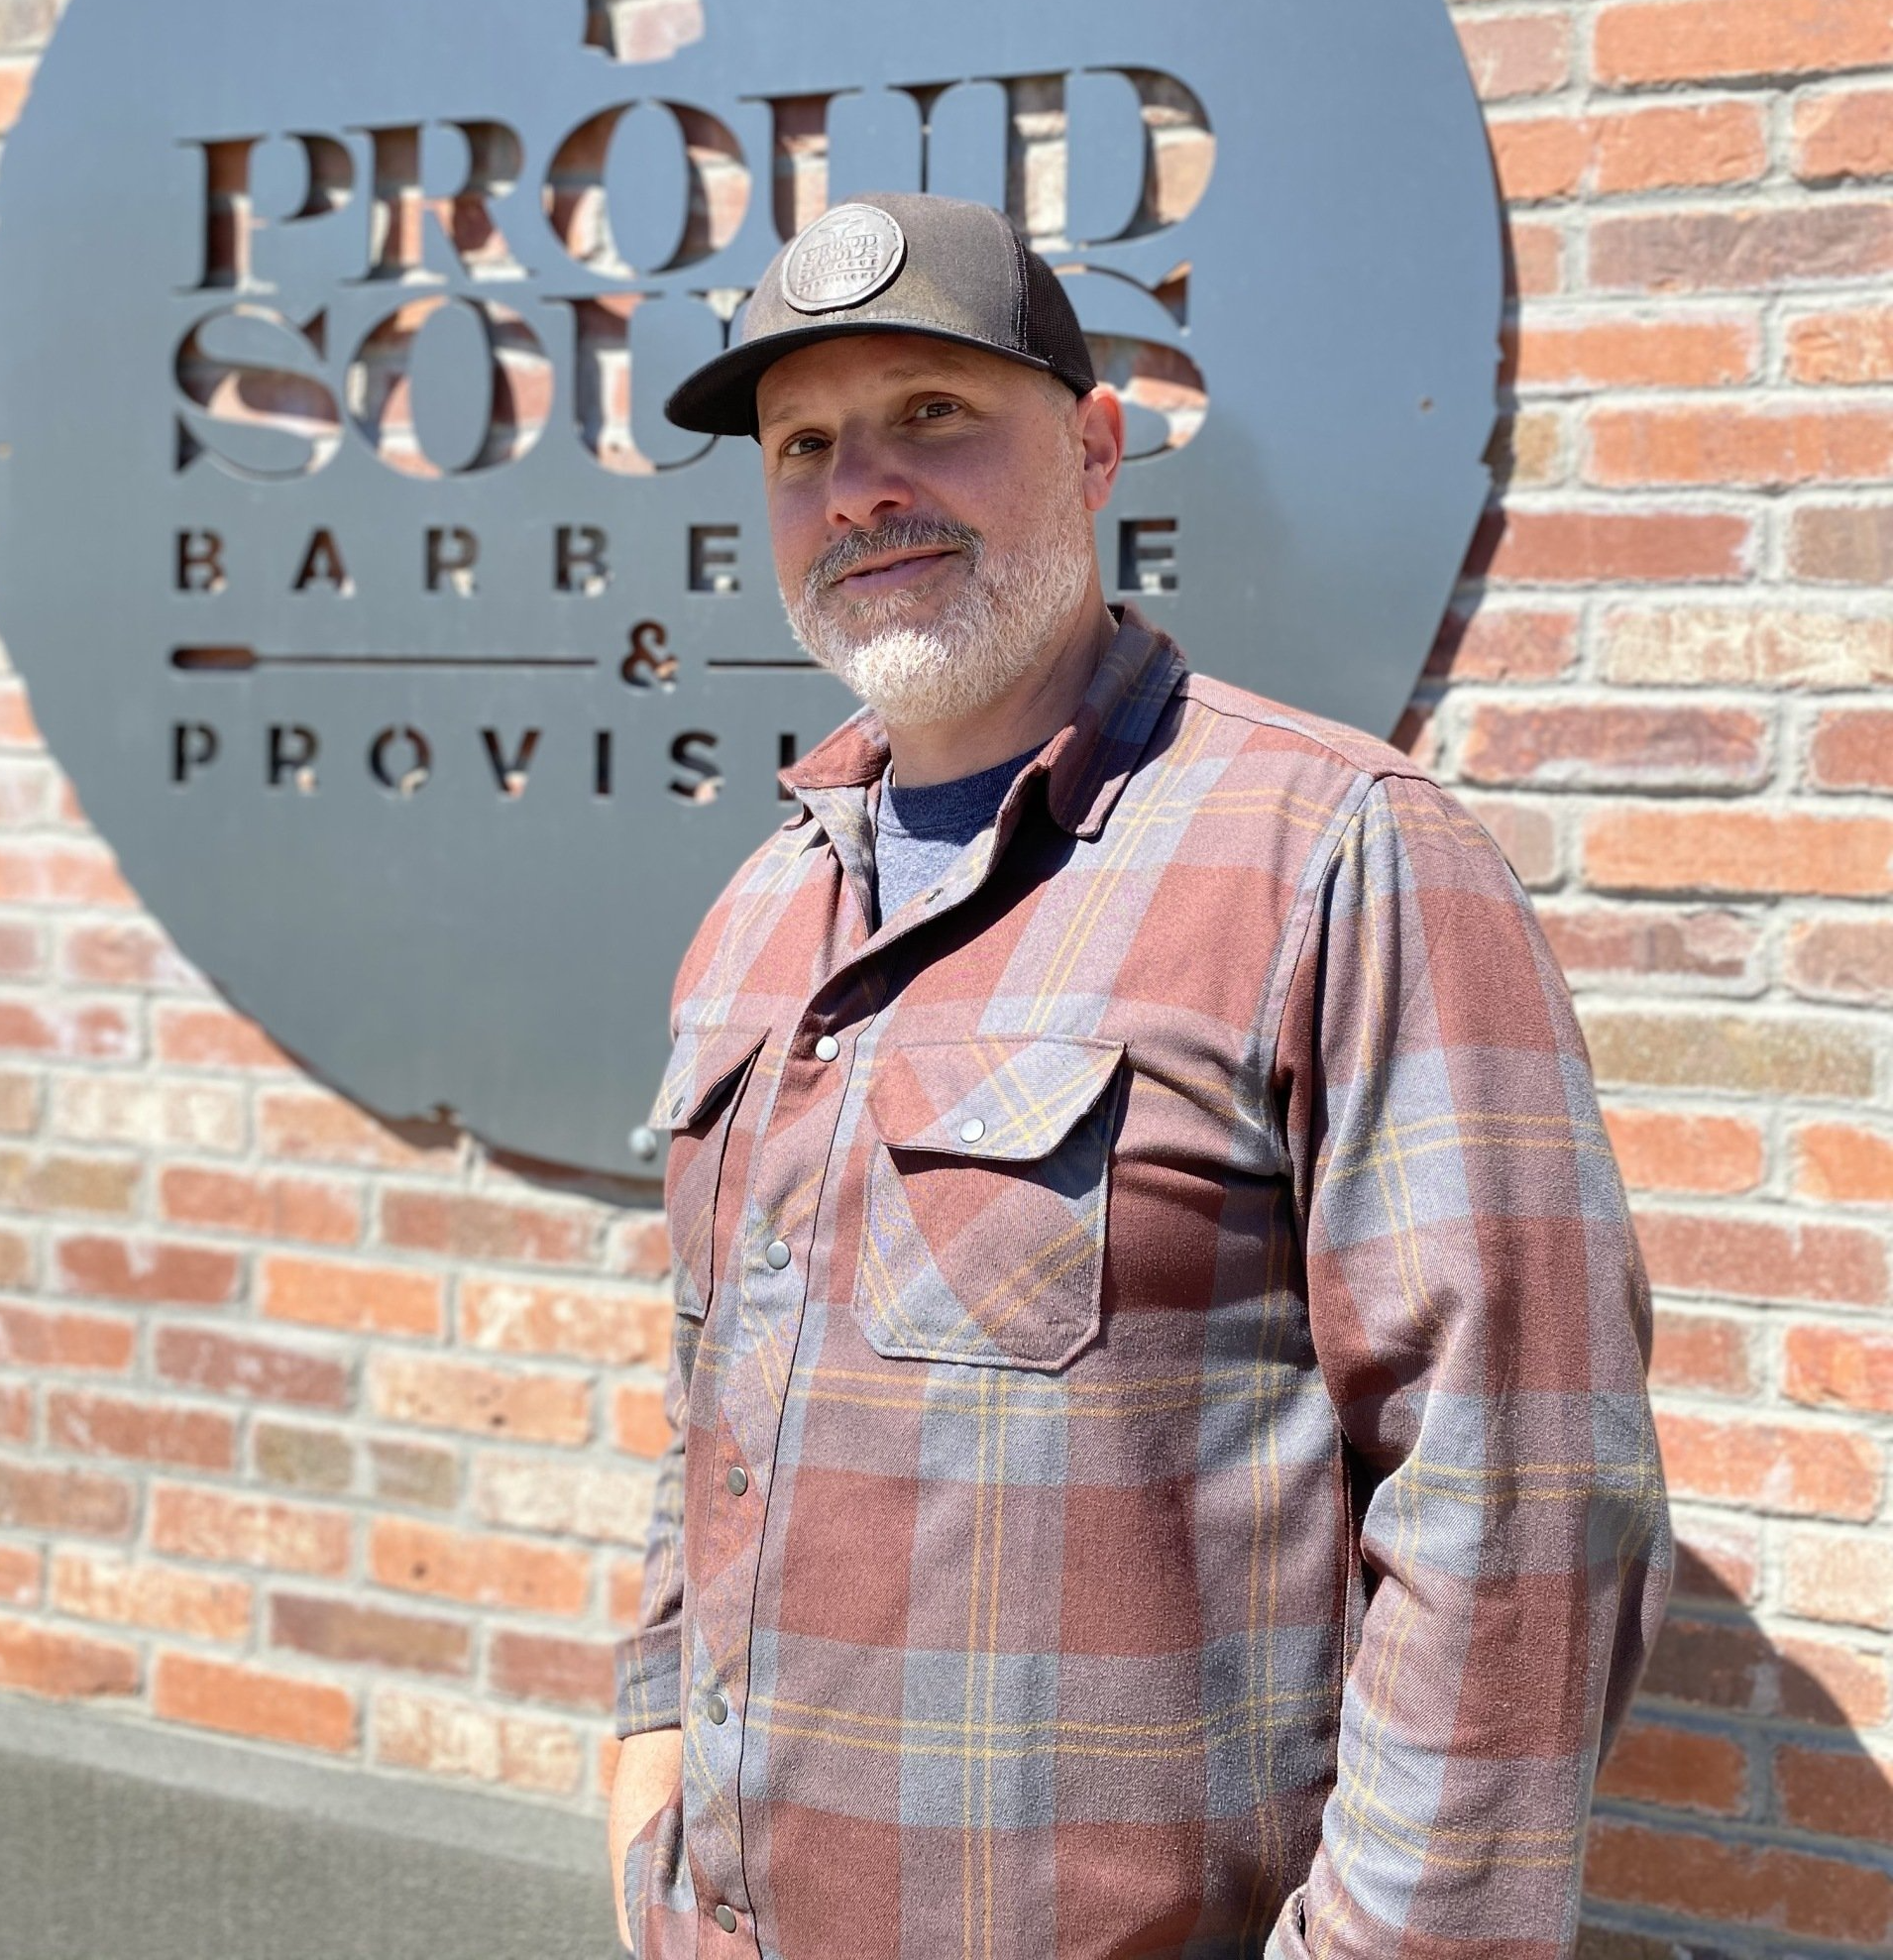 Tony Roberts, Founder at Proud Souls Barbecue and Provisions